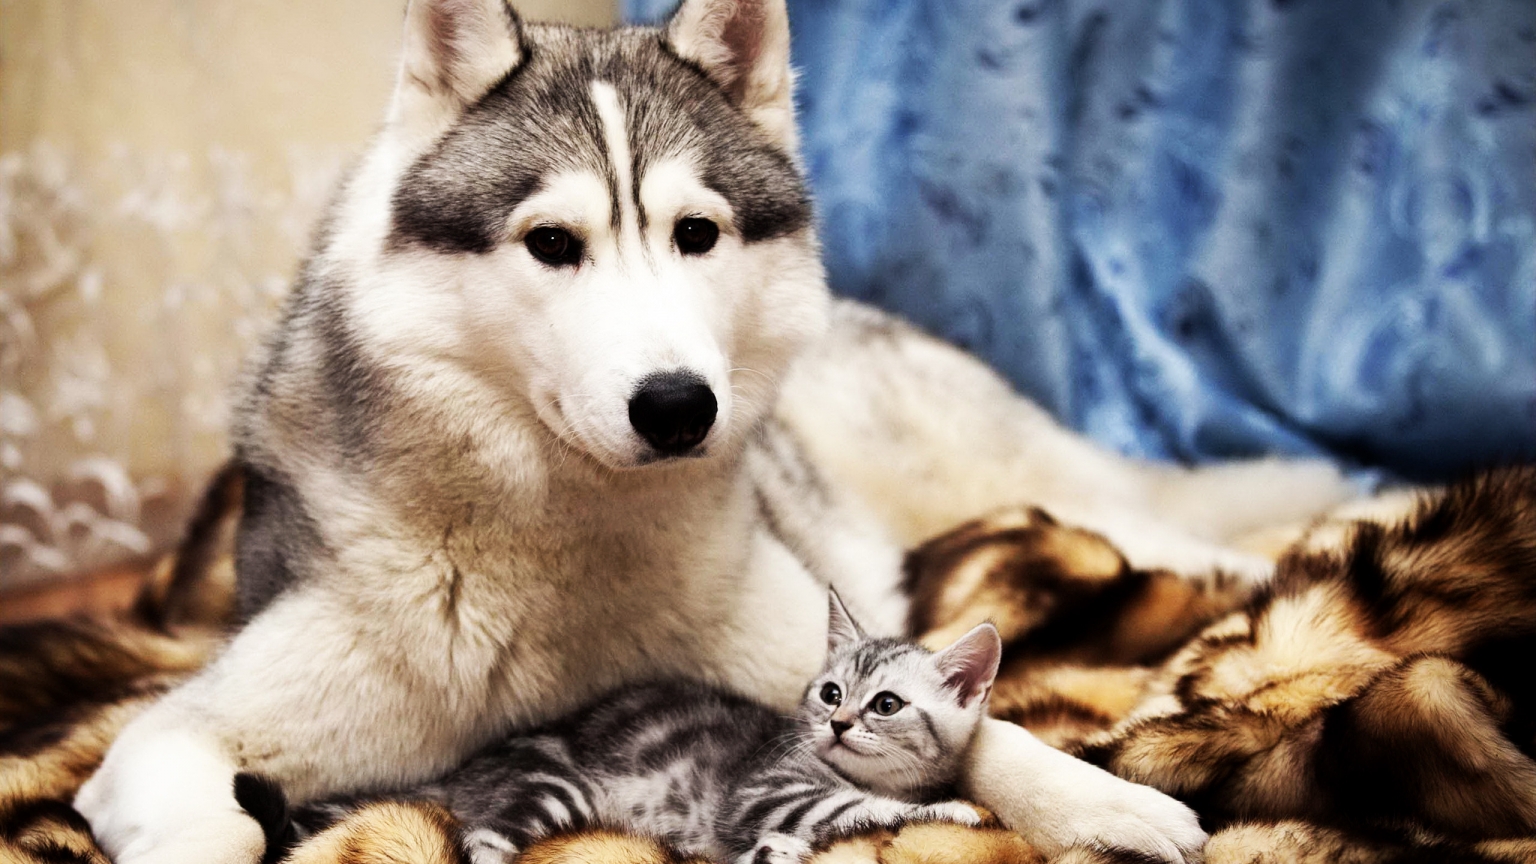 Dog and Cat Friends for 1536 x 864 HDTV resolution